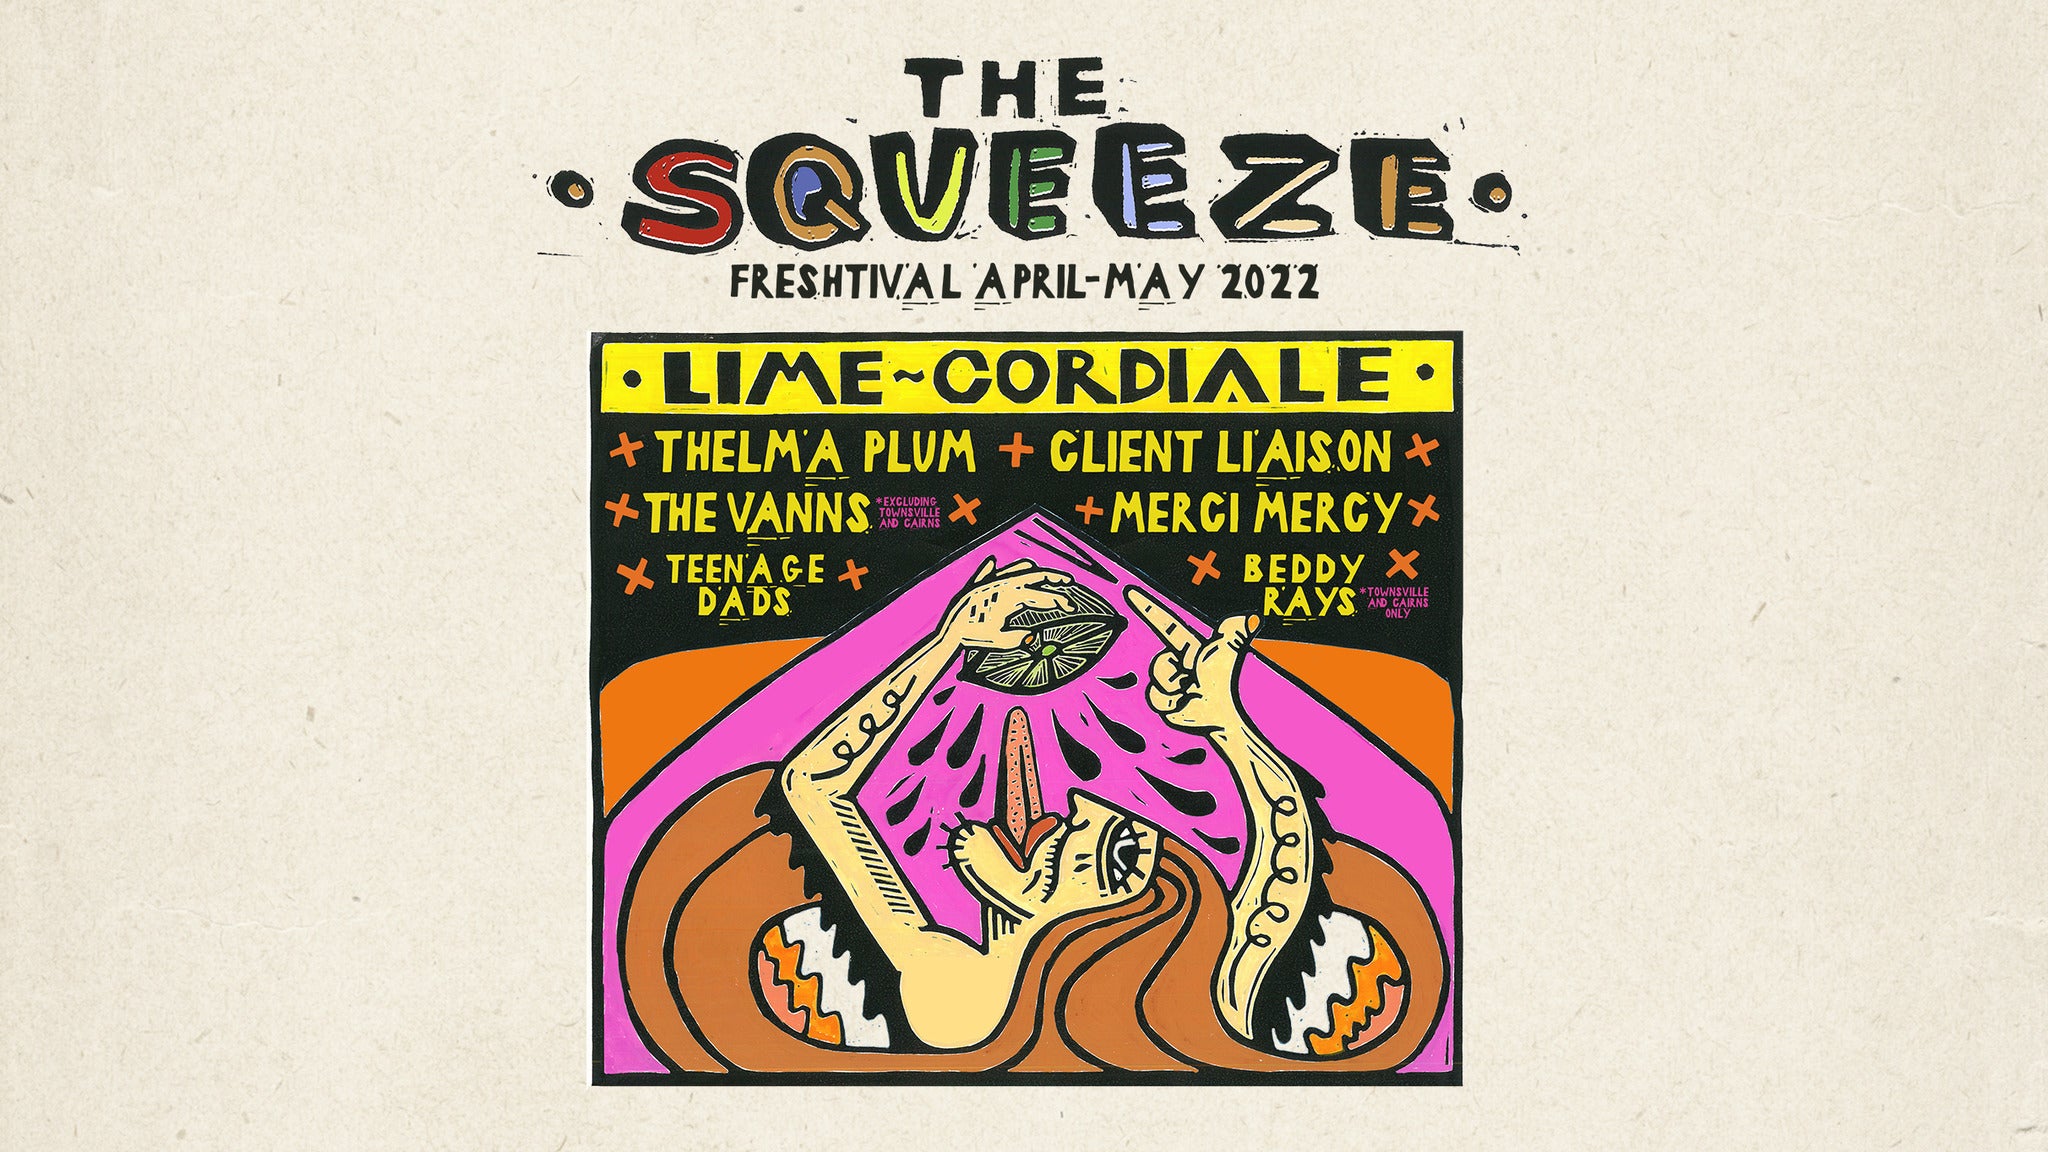 Image used with permission from Ticketmaster | The Squeeze Festival tickets